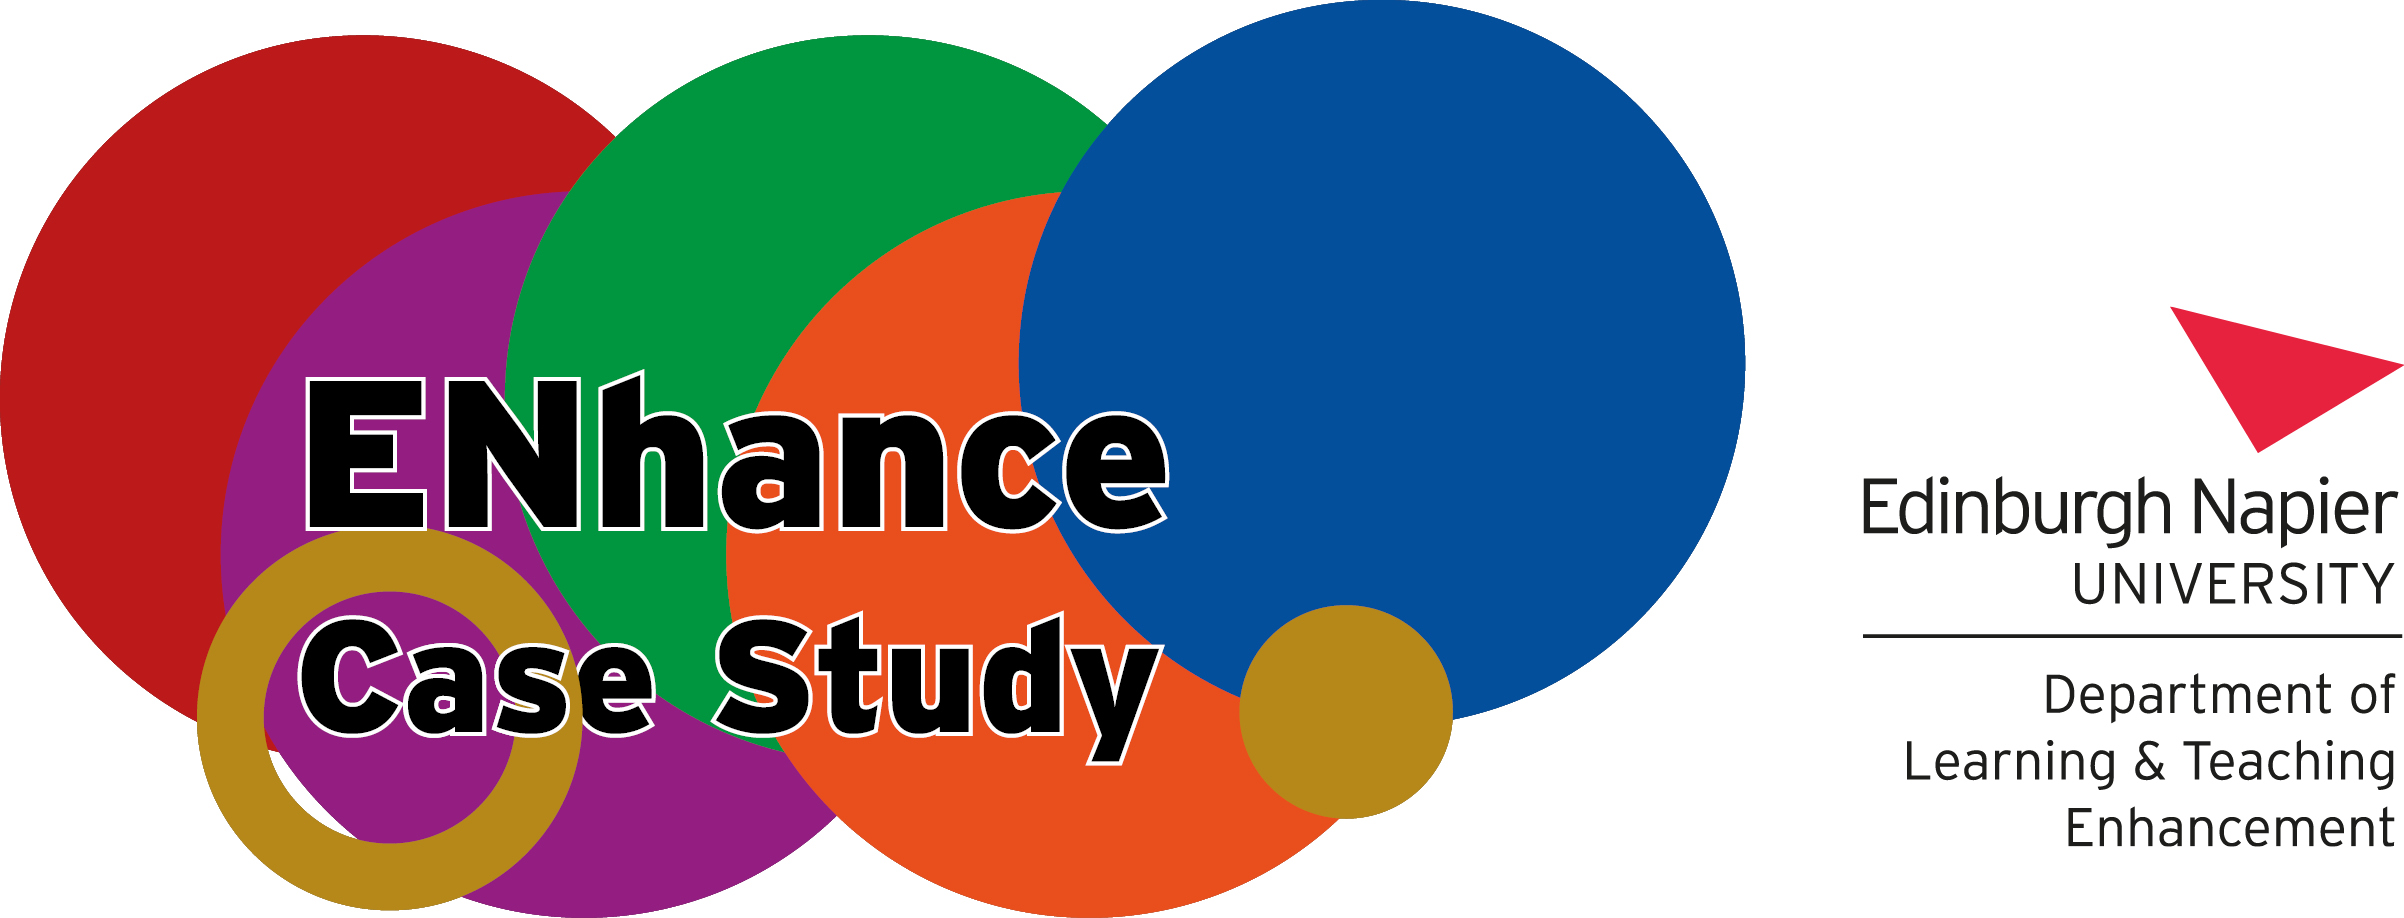 ENhance Case Study header. Coloured circles representing the colours of the ENhance themes, a gold circle for Student Focus and a gold ring for the cross-cutting themes. 